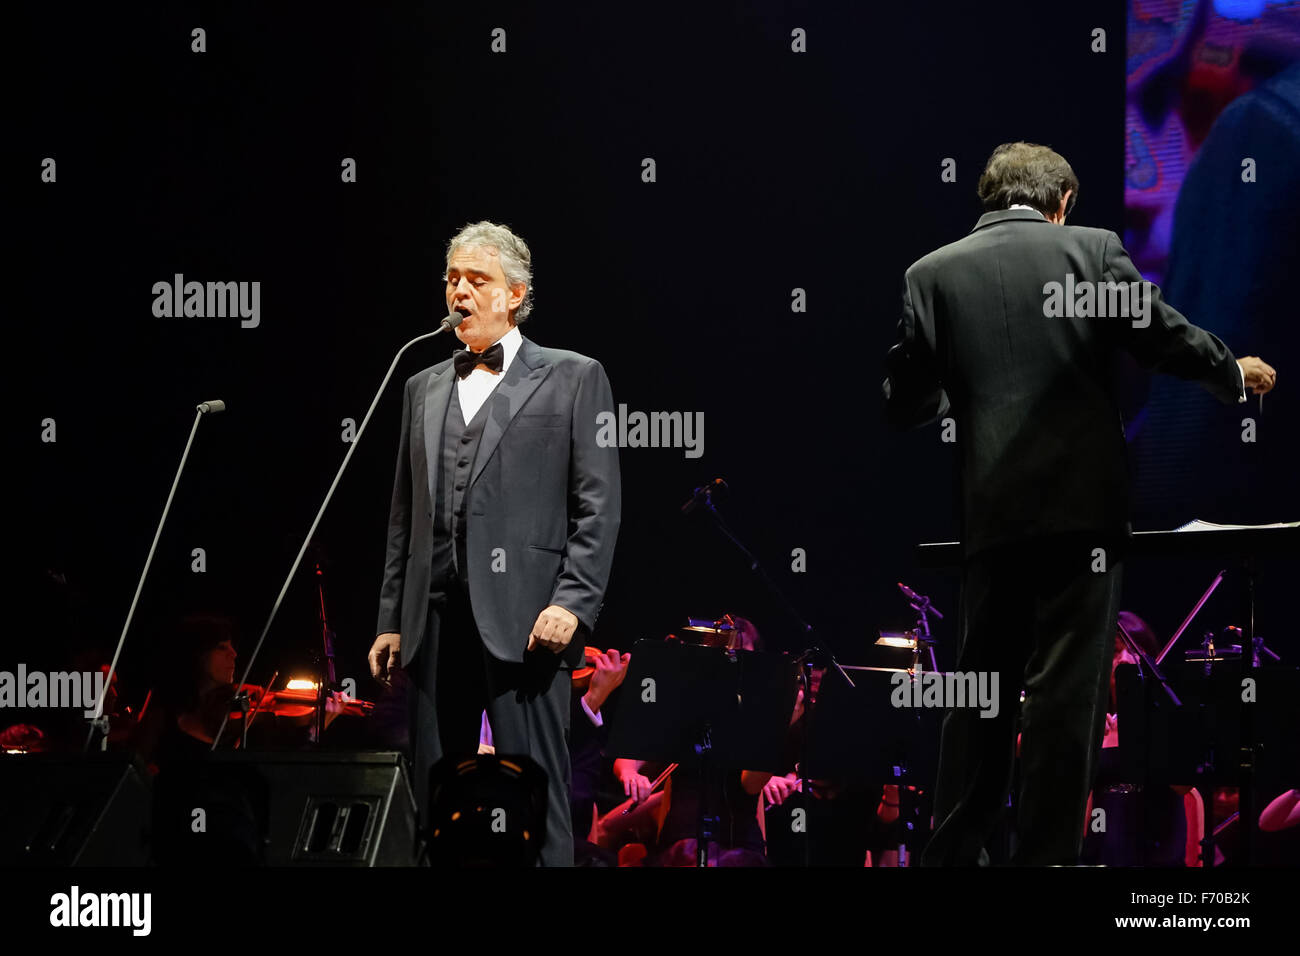 Budapest. 22nd Nov, 2015. Italian tenor Andrea Bocelli sings at a concert in Papp Laszlo Sports Arena in Budapest, Hungary on Nov. 22, 2015. © Attila Volgyi/Xinhua/Alamy Live News Stock Photo